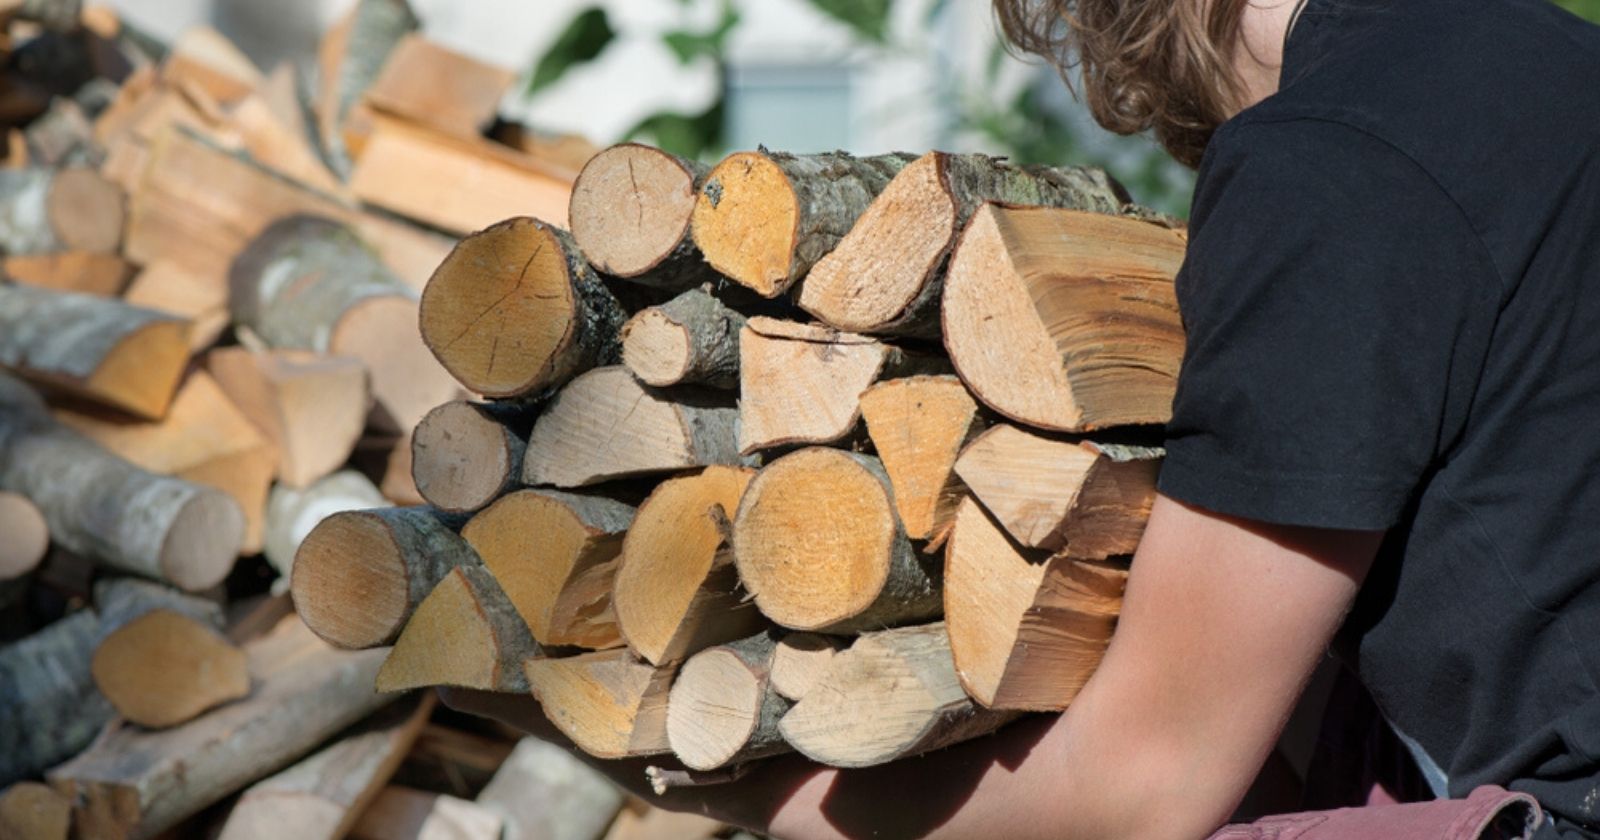 Where to buy firewood for your fireplace?

